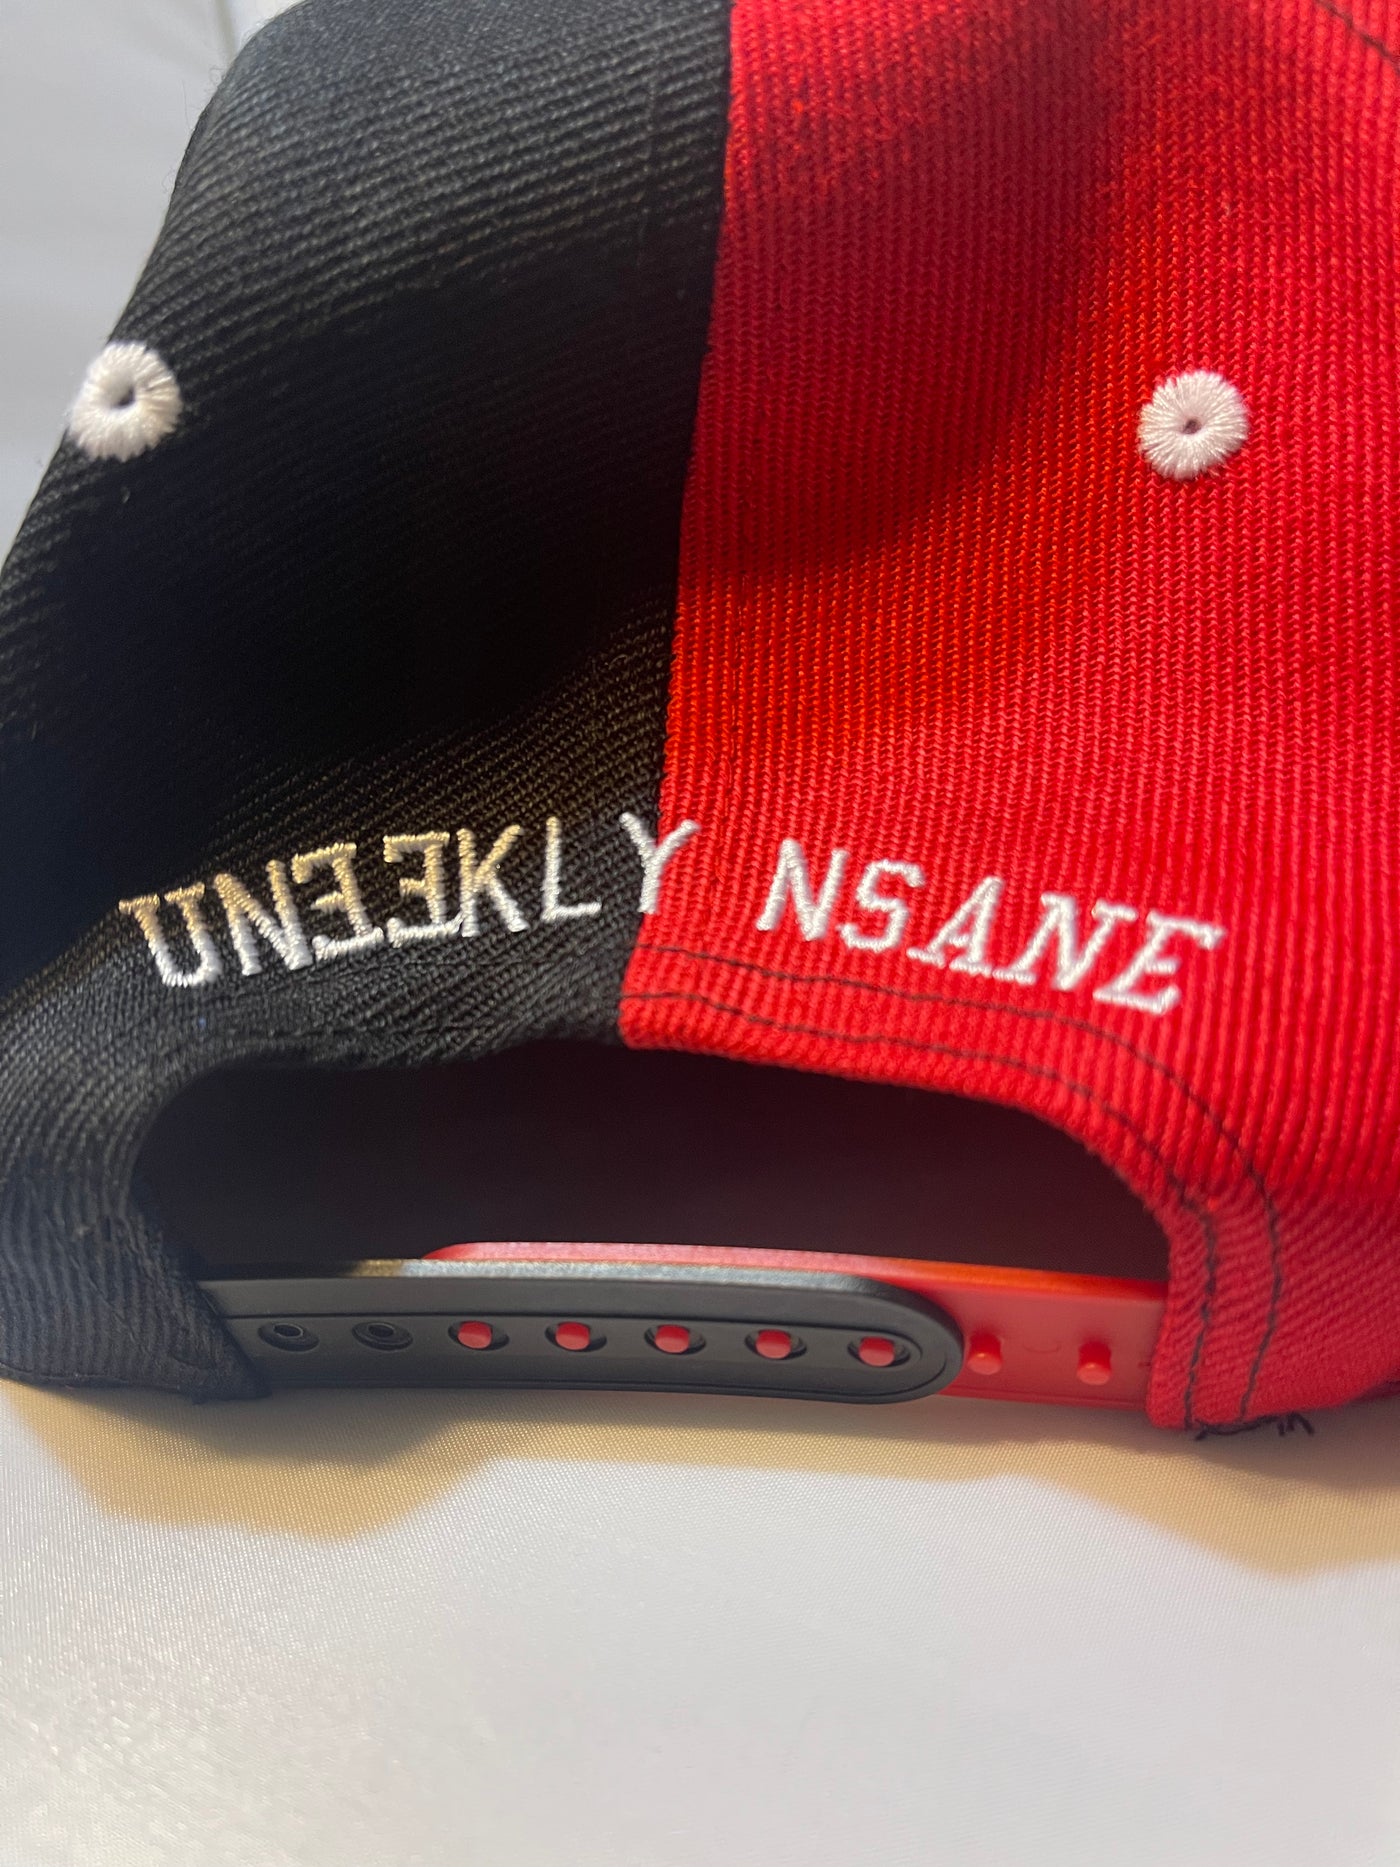 Nsane Fire & Onyx SnapBack - Unique Sweatsuits, hats, tees, shorts, hoodies, Outwear & accessories online | Uneekly Nsane